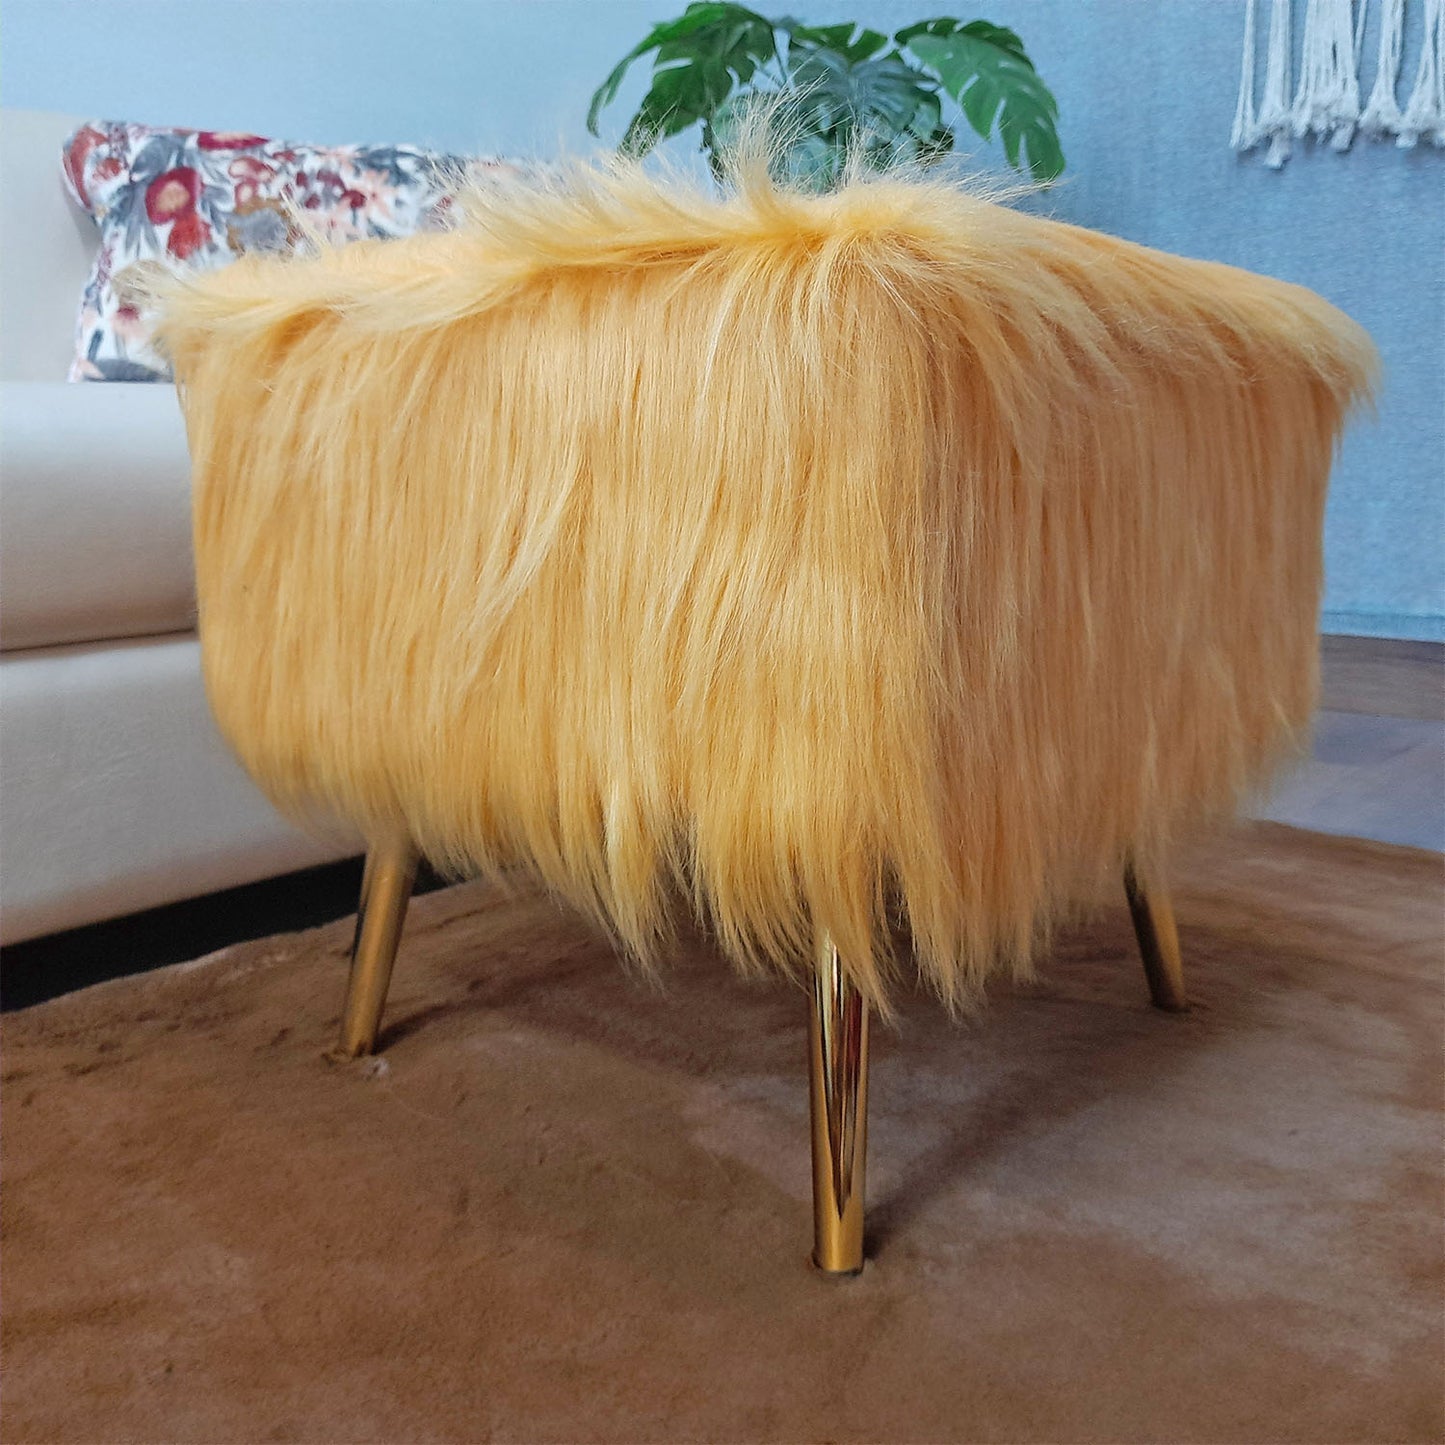 Noviato Collection – Amber Premium Long Faux Fur Footstool Gold Metal Legs Modern On-Trend Style Square Multi-Functional Ottoman Stool Seat, 40 cm Tall | from Avioni